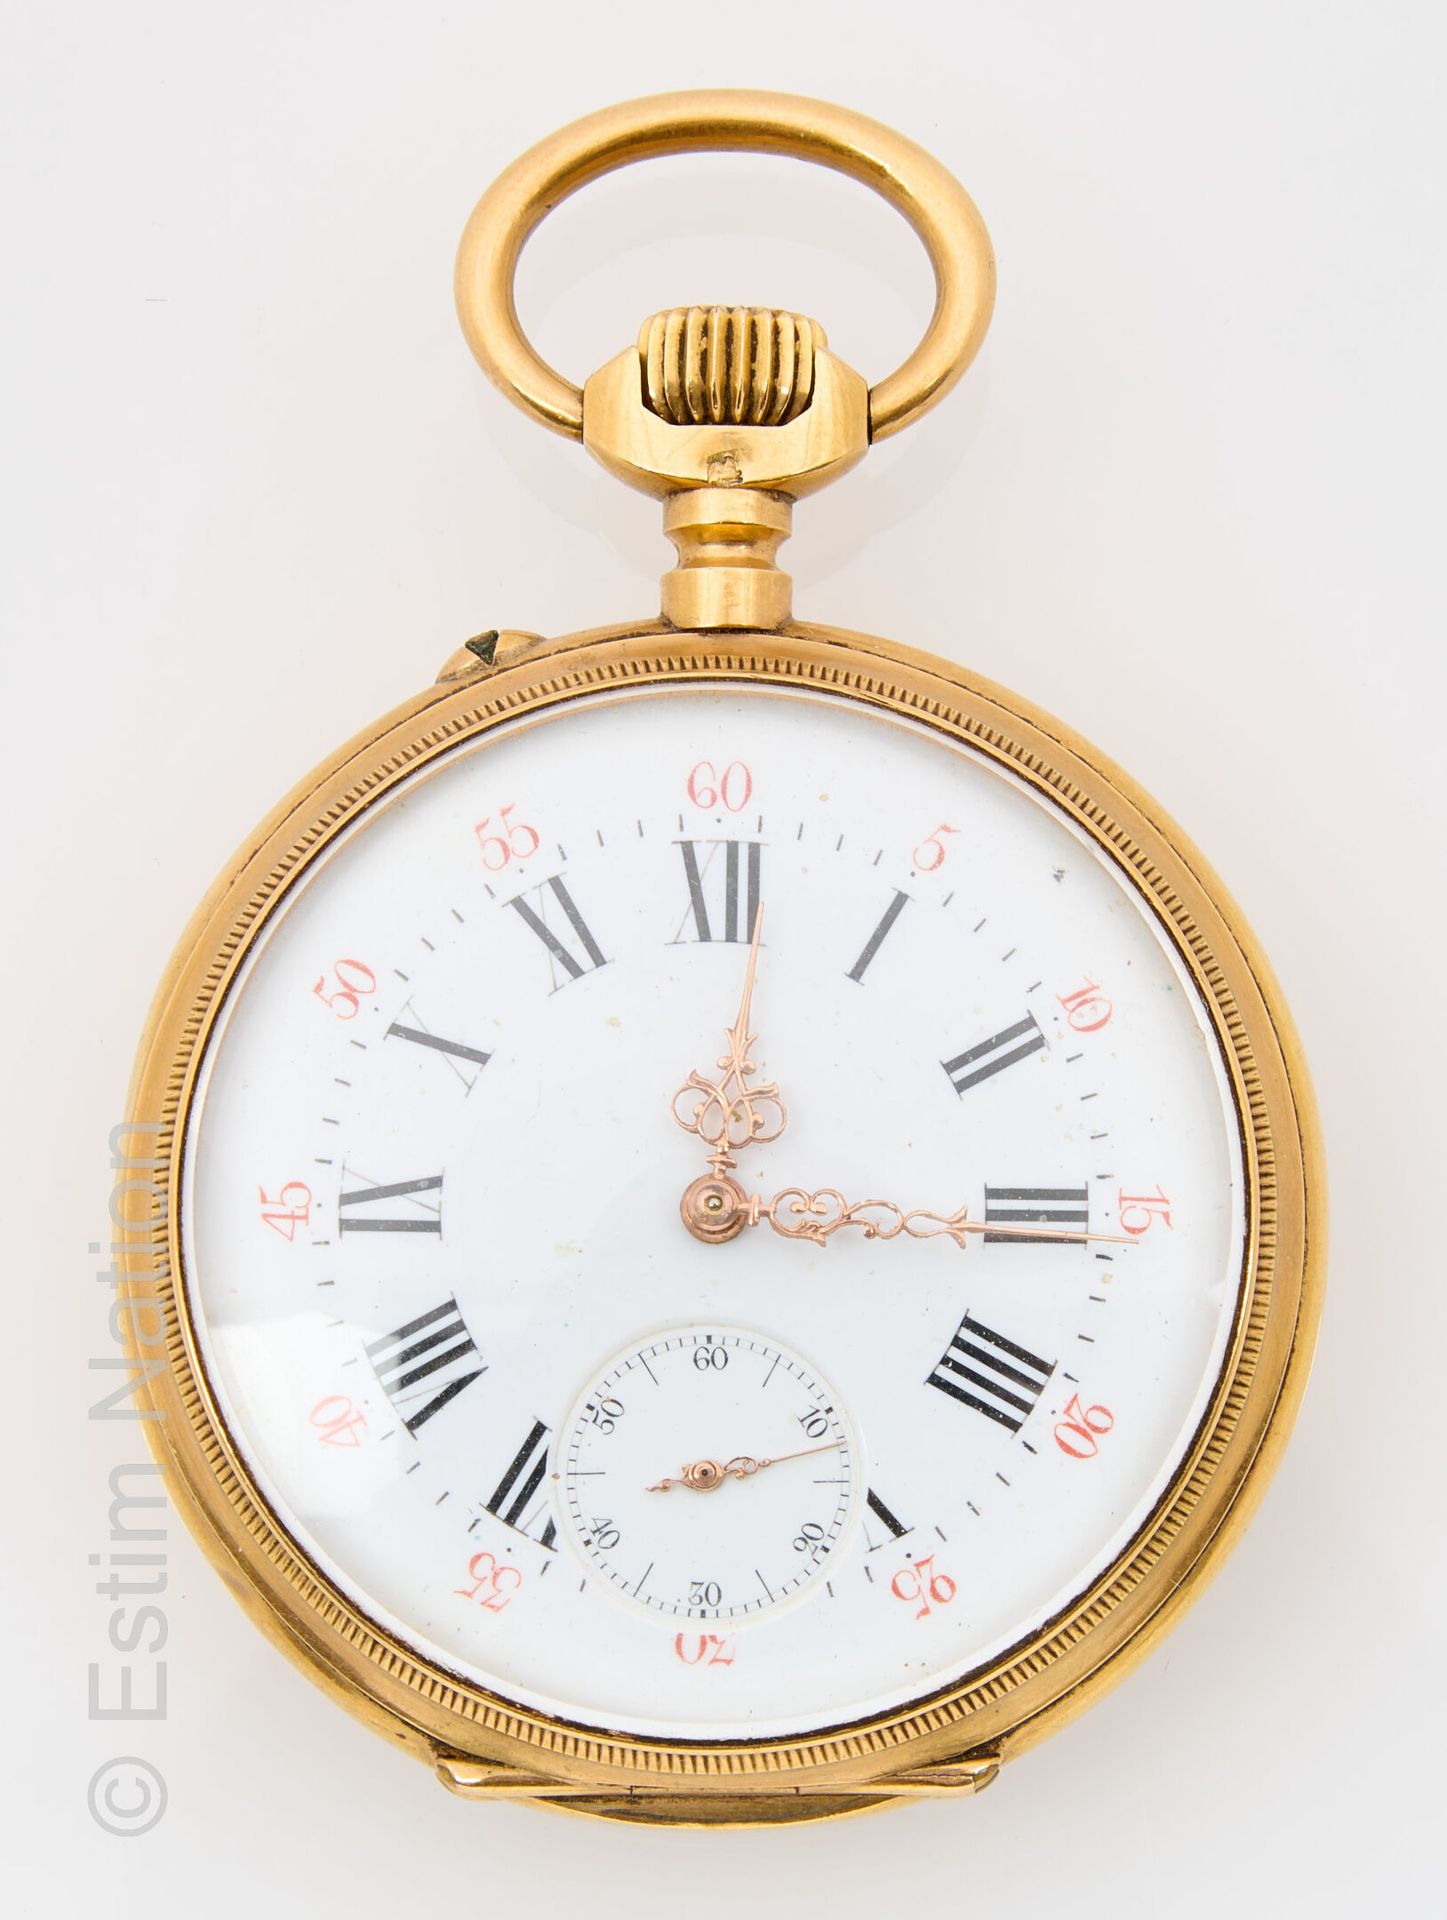 MONTRE DE POCHE OR Pocket watch in yellow gold 18K 750 thousandth with mechanica&hellip;